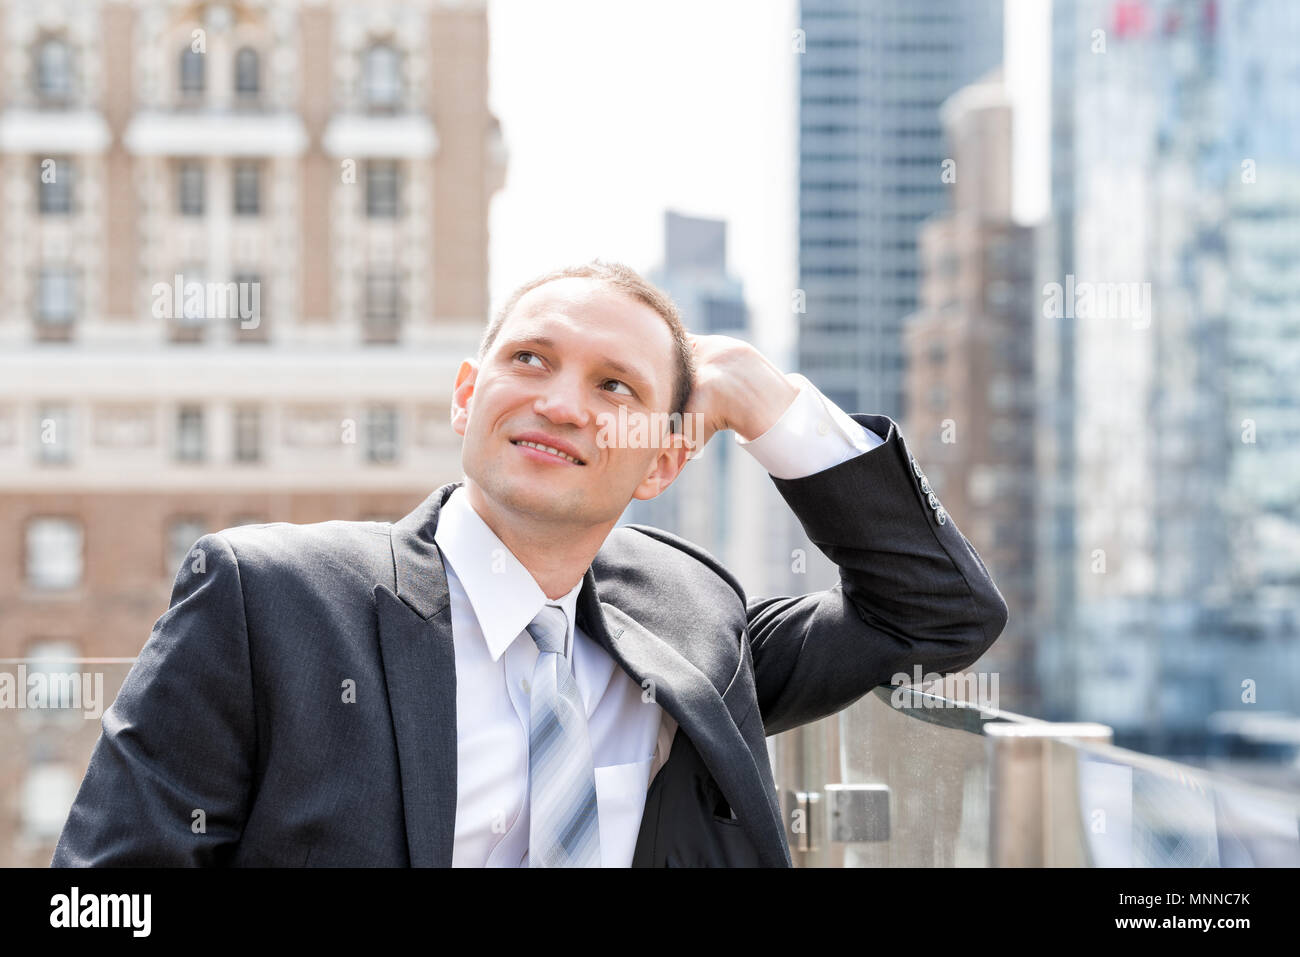 Handsome, attractive young happy smiling businessman closeup face portrait standing in suit, tie, looking up on New York City cityscape skyline in Man Stock Photo